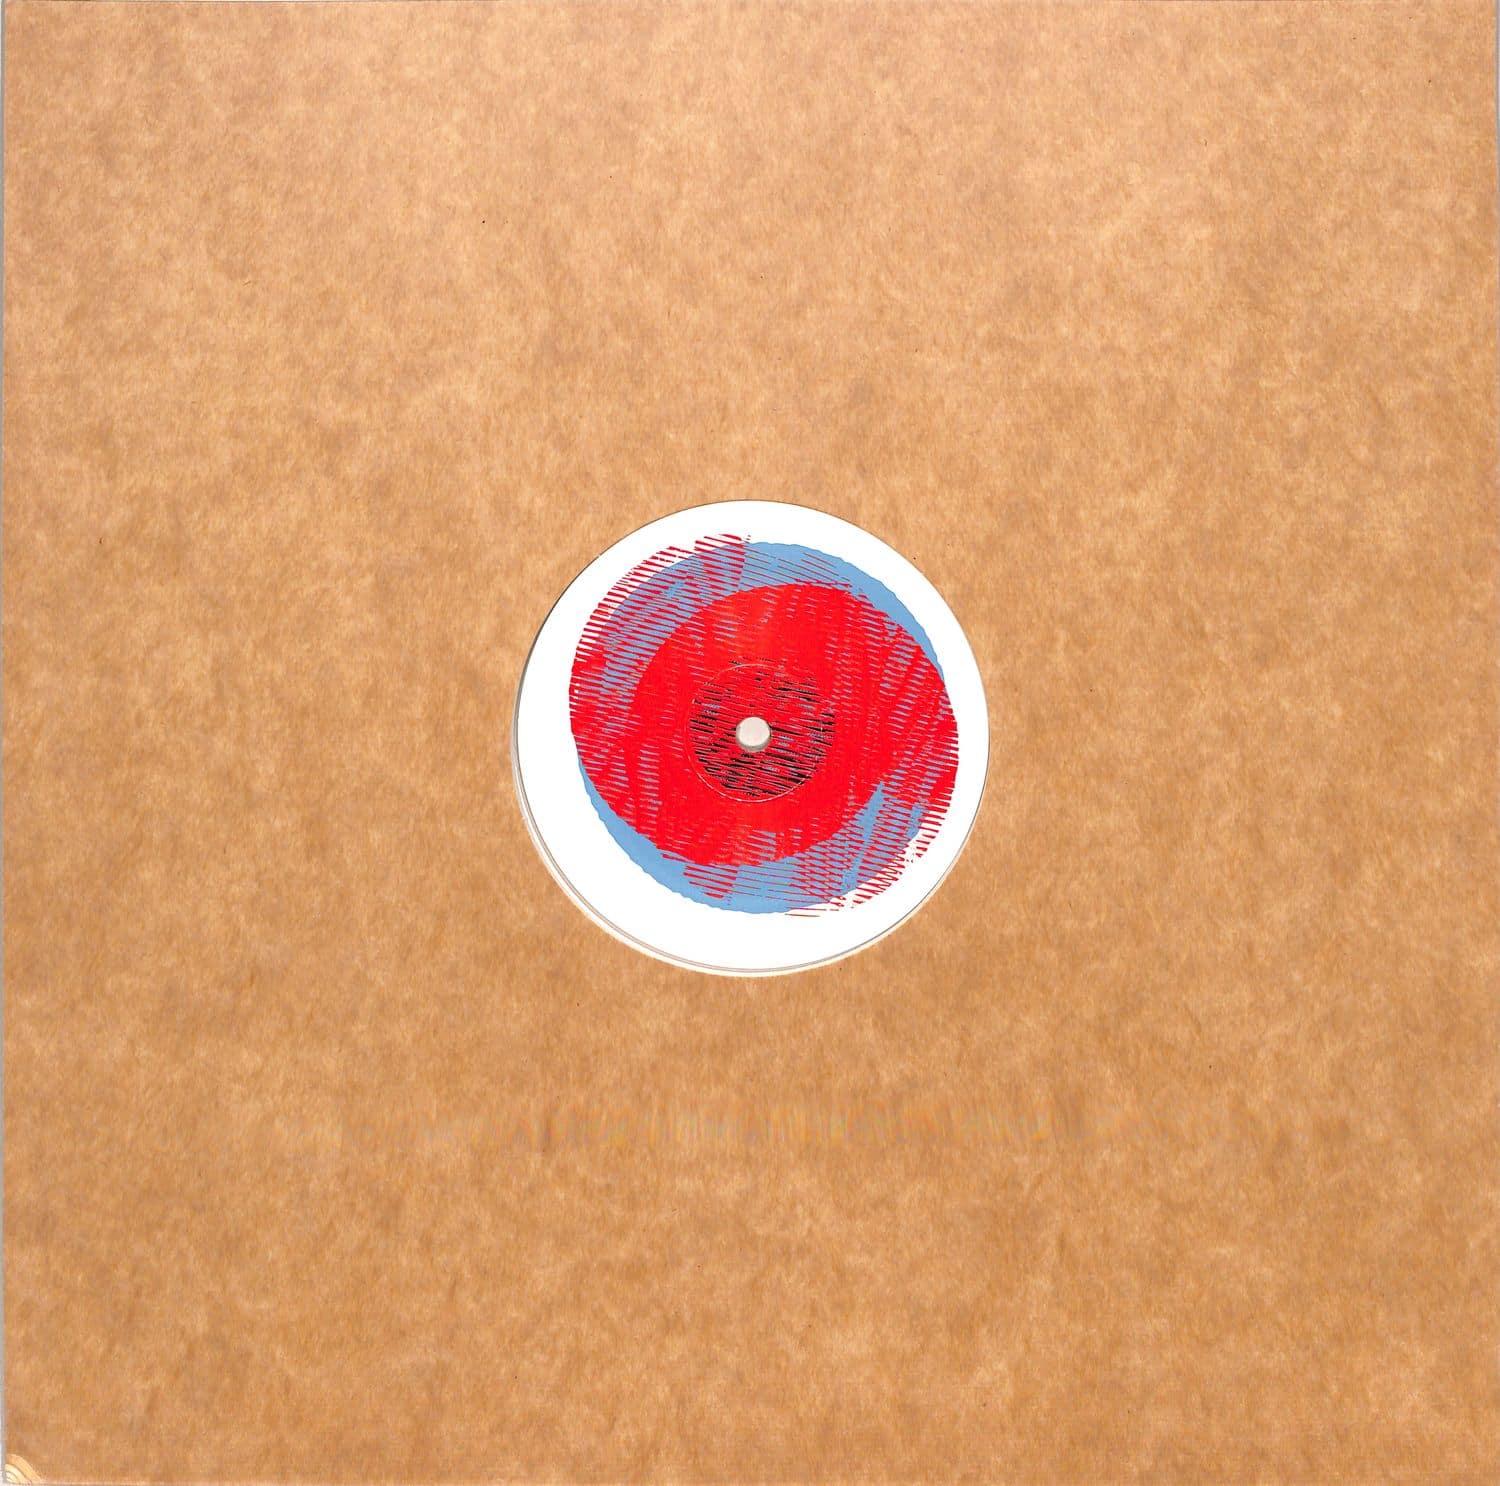 Chip Wickham - BLUE TO RED REMIXED 